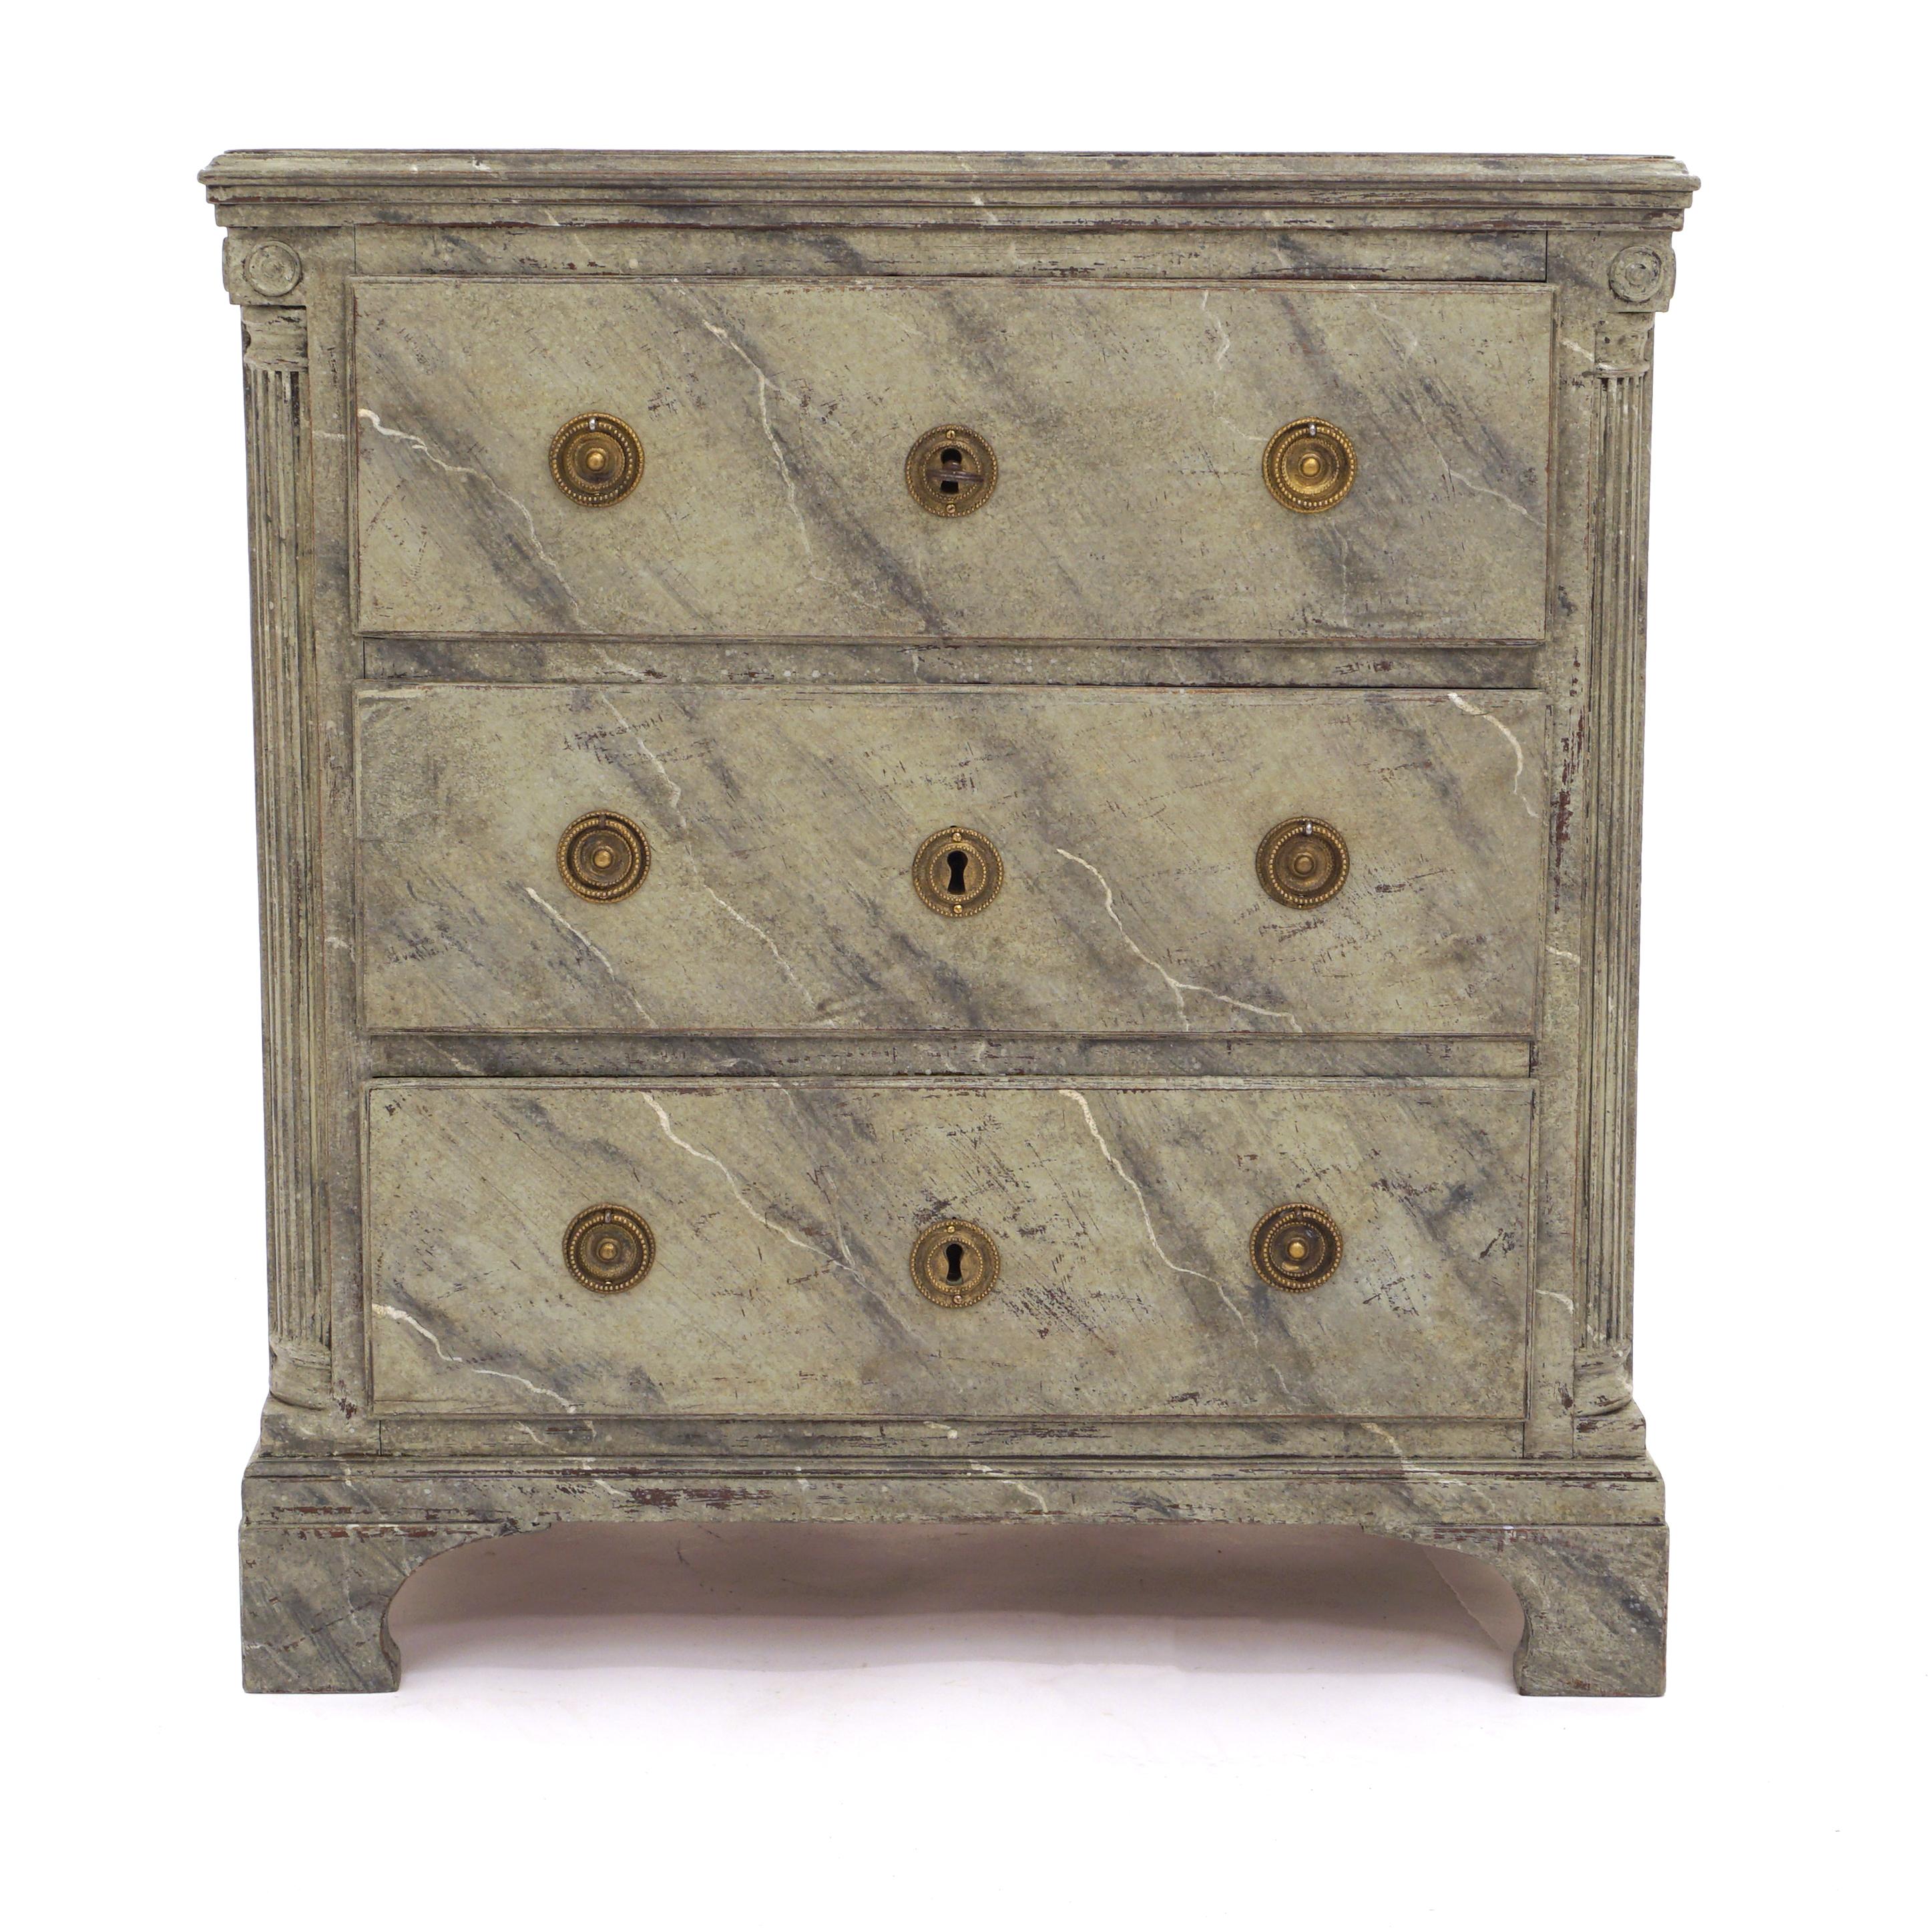 Green and grey marbled Danish Louis XVI commode with three drawers
Denmark, circa 1780.